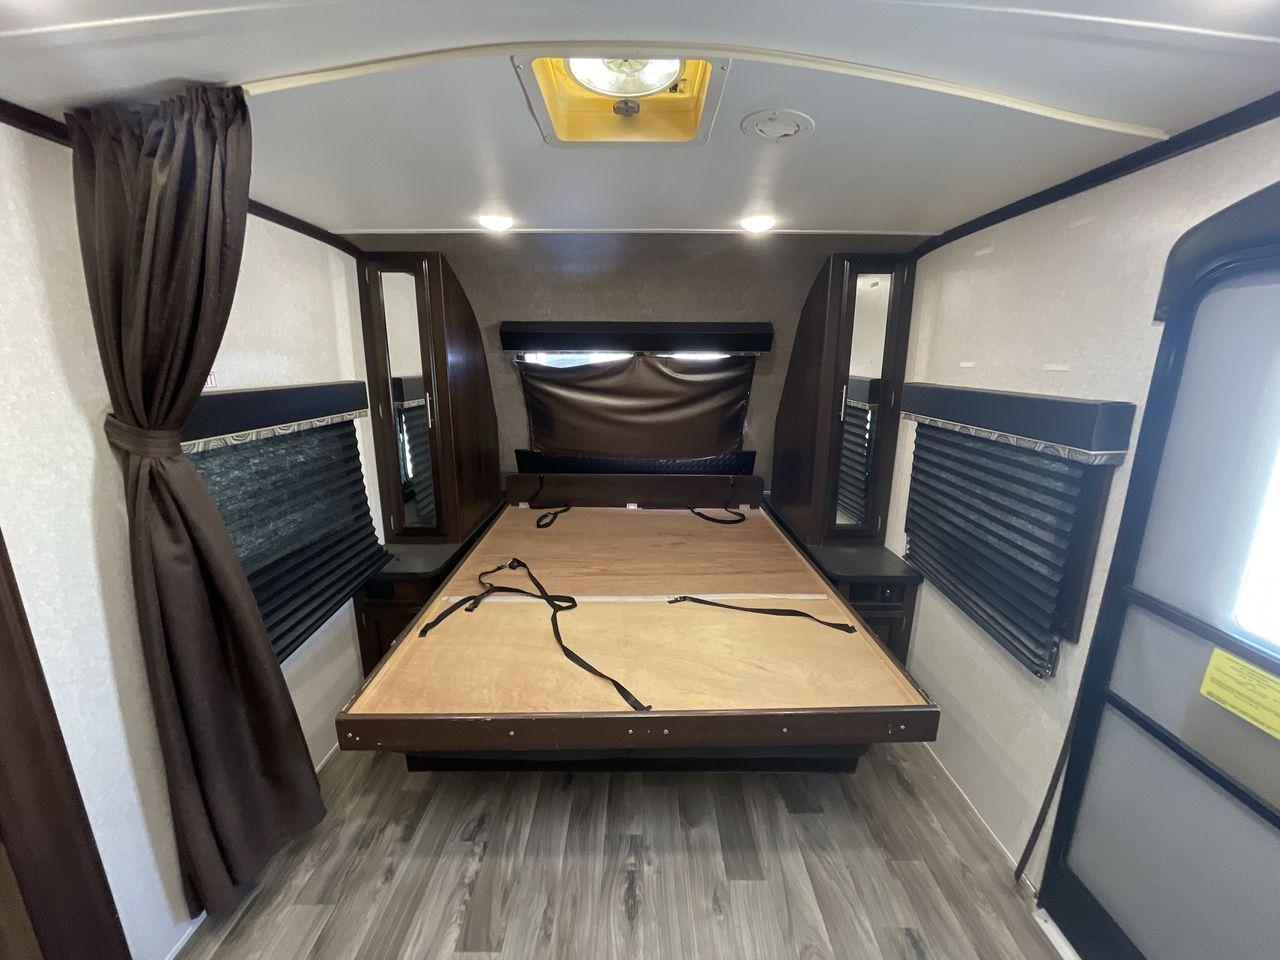 2018 WHITE JAYCO JAY FLIGHT 23MRB (1UJBJ0BN5J1) , Length: 28.17 ft | Dry Weight: 5,560 lbs. | Gross Weight: 7,250 lbs. | Slides: 1 transmission, located at 4319 N Main Street, Cleburne, TX, 76033, (817) 221-0660, 32.435829, -97.384178 - The 2018 Jayco Jay Flight 23MRB is a travel trailer that encapsulates both compactness and luxury for unparalleled camping experiences. Spanning 28 feet in length, this model boasts a thoughtfully arranged interior featuring a single slide-out, seamlessly amplifying the living space. The Jay Flight - Photo #17